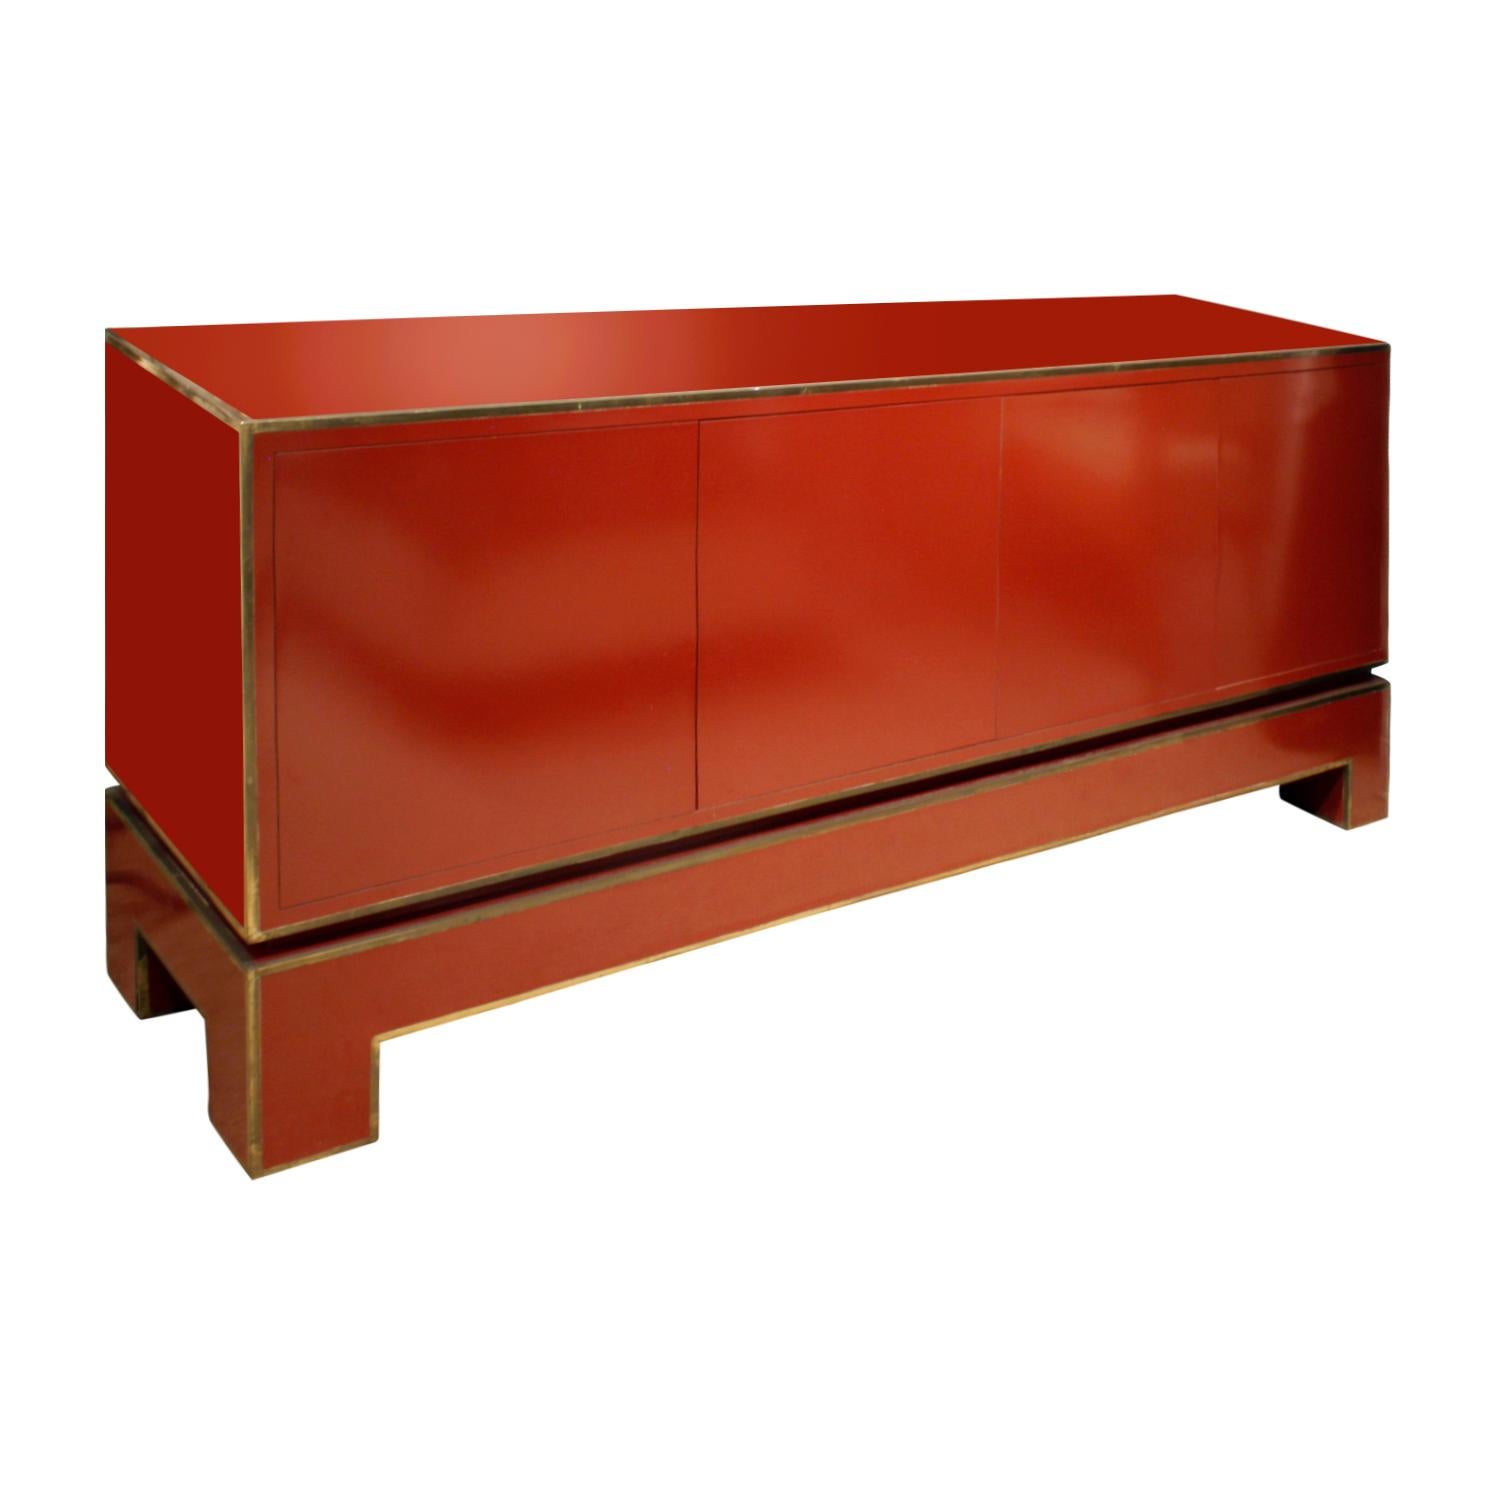 4-door credenza in red lacquer with brass trim by Alain Delon for Maison Jansen, France, 1970s. Signed “ADelon” on brass label on interior of far left door. There are glass shelves inside. This is a very chic credenza.